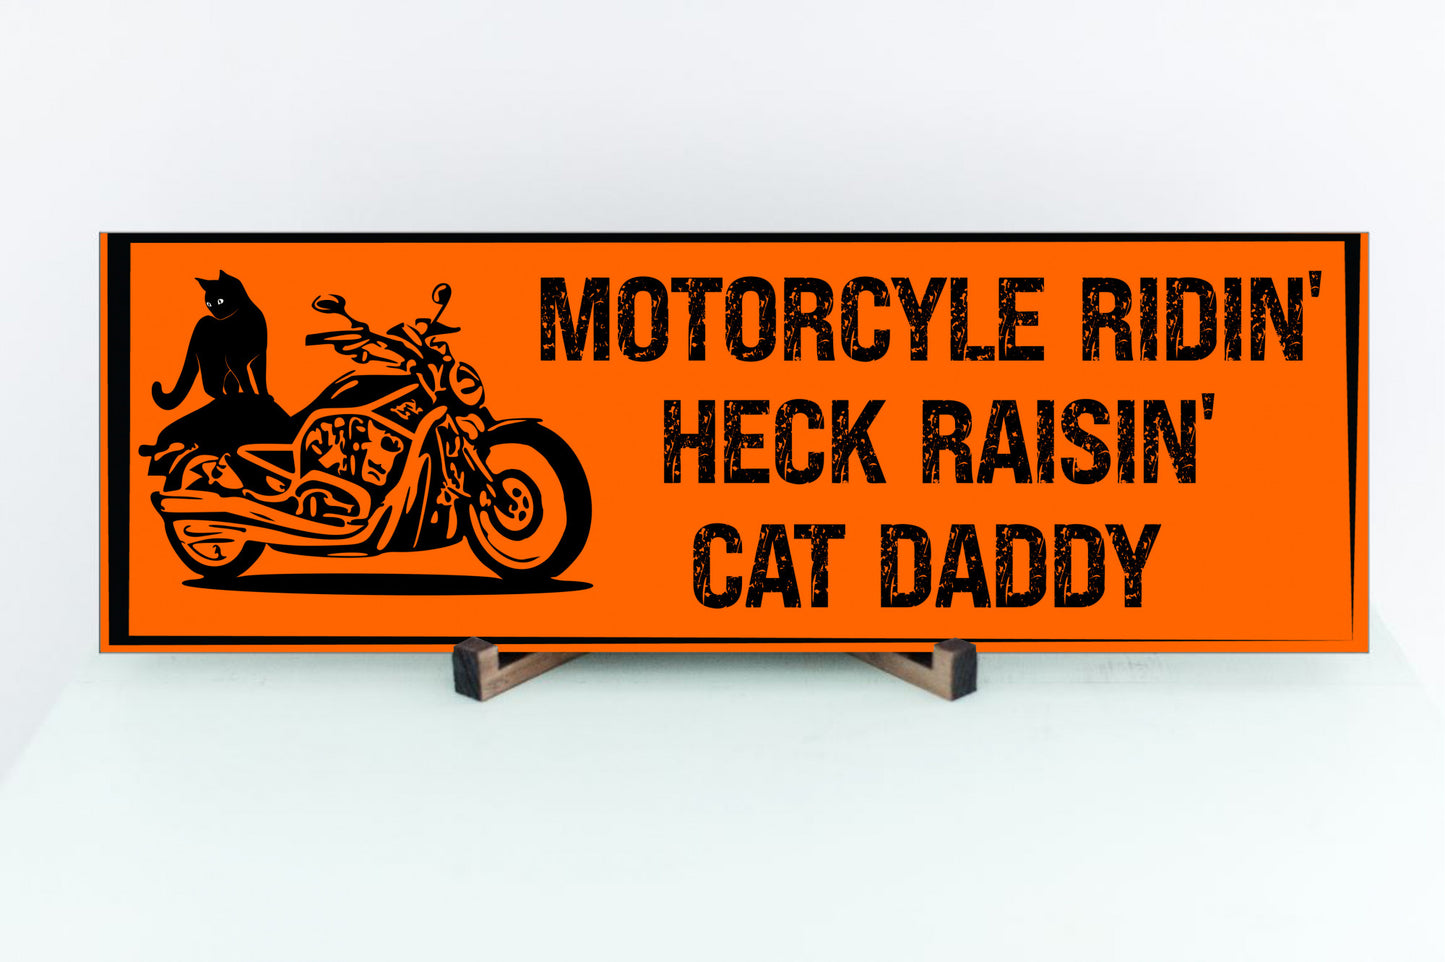 Motorcycle Ridin' Heck Raisin' Cat Daddy Sign